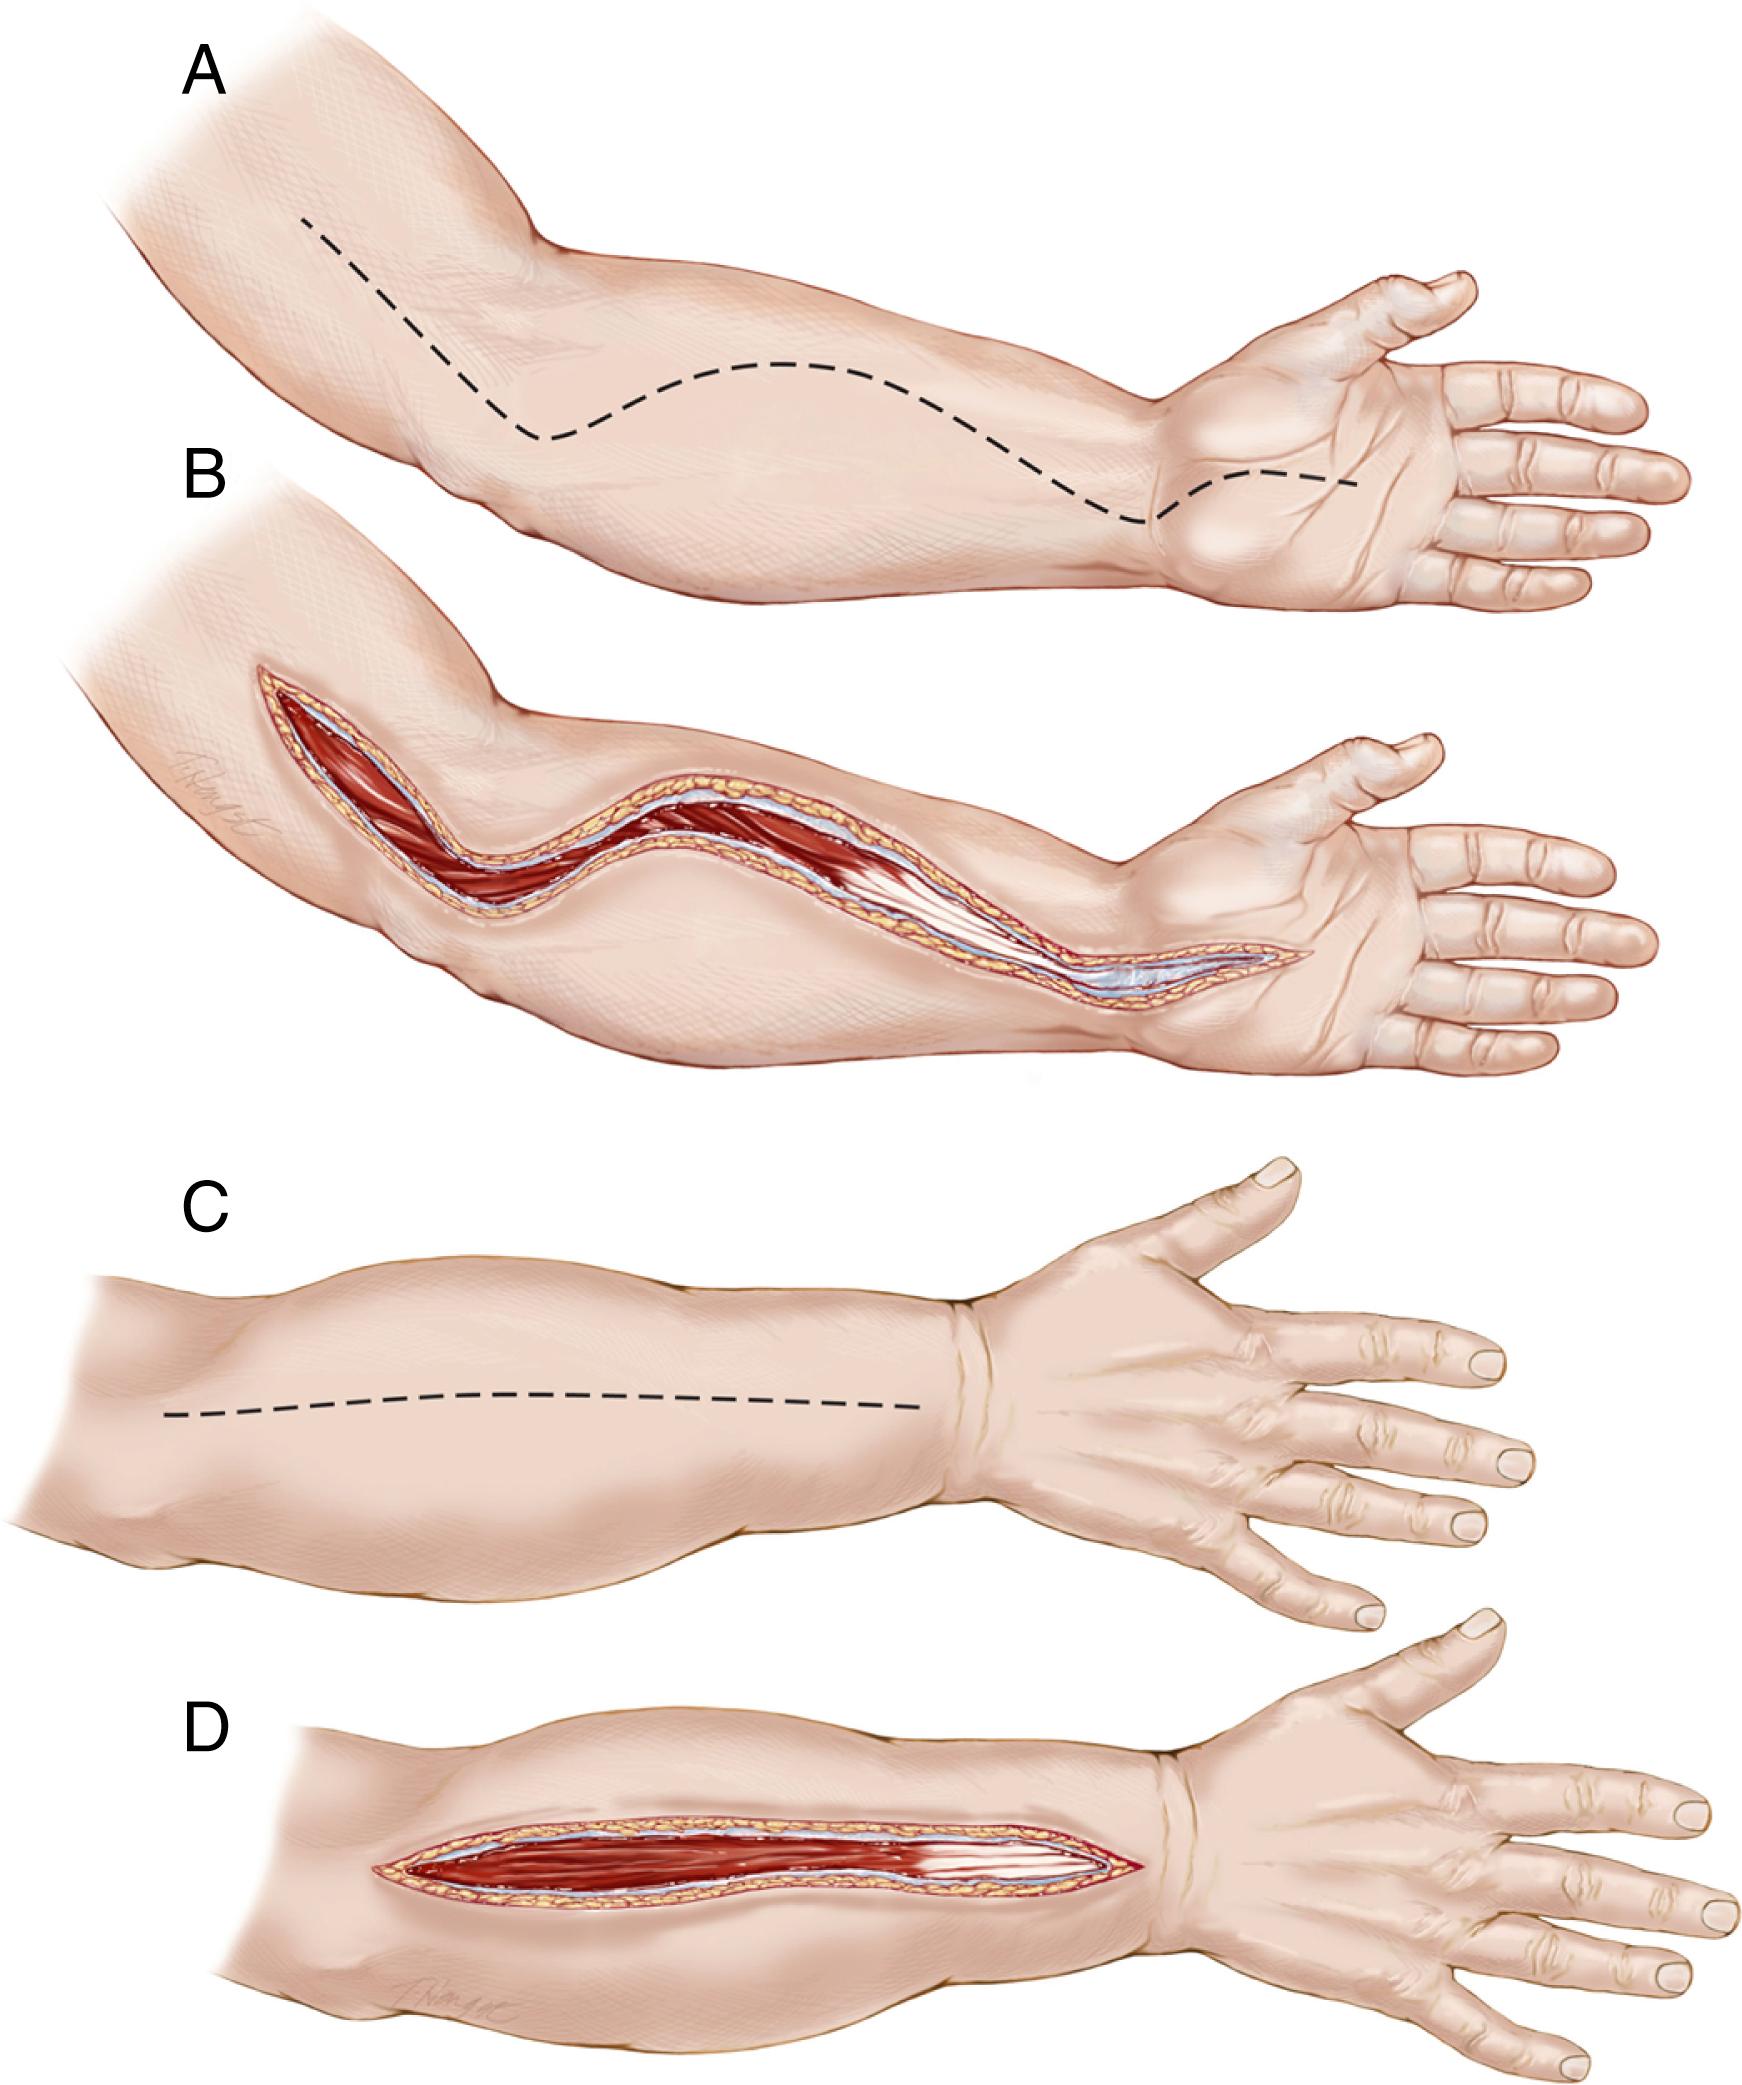 Fig. 51.6, Extensile incision for decompression of the forearm: The incision can be extended proximally to decompress the arm and distally into the carpal tunnel. A, Line of skin incision for volar release. B, Volar incision opened from the midarm to the carpal tunnel. C, Line of the dorsal incision. D, Dorsal incision opened and fascia released.